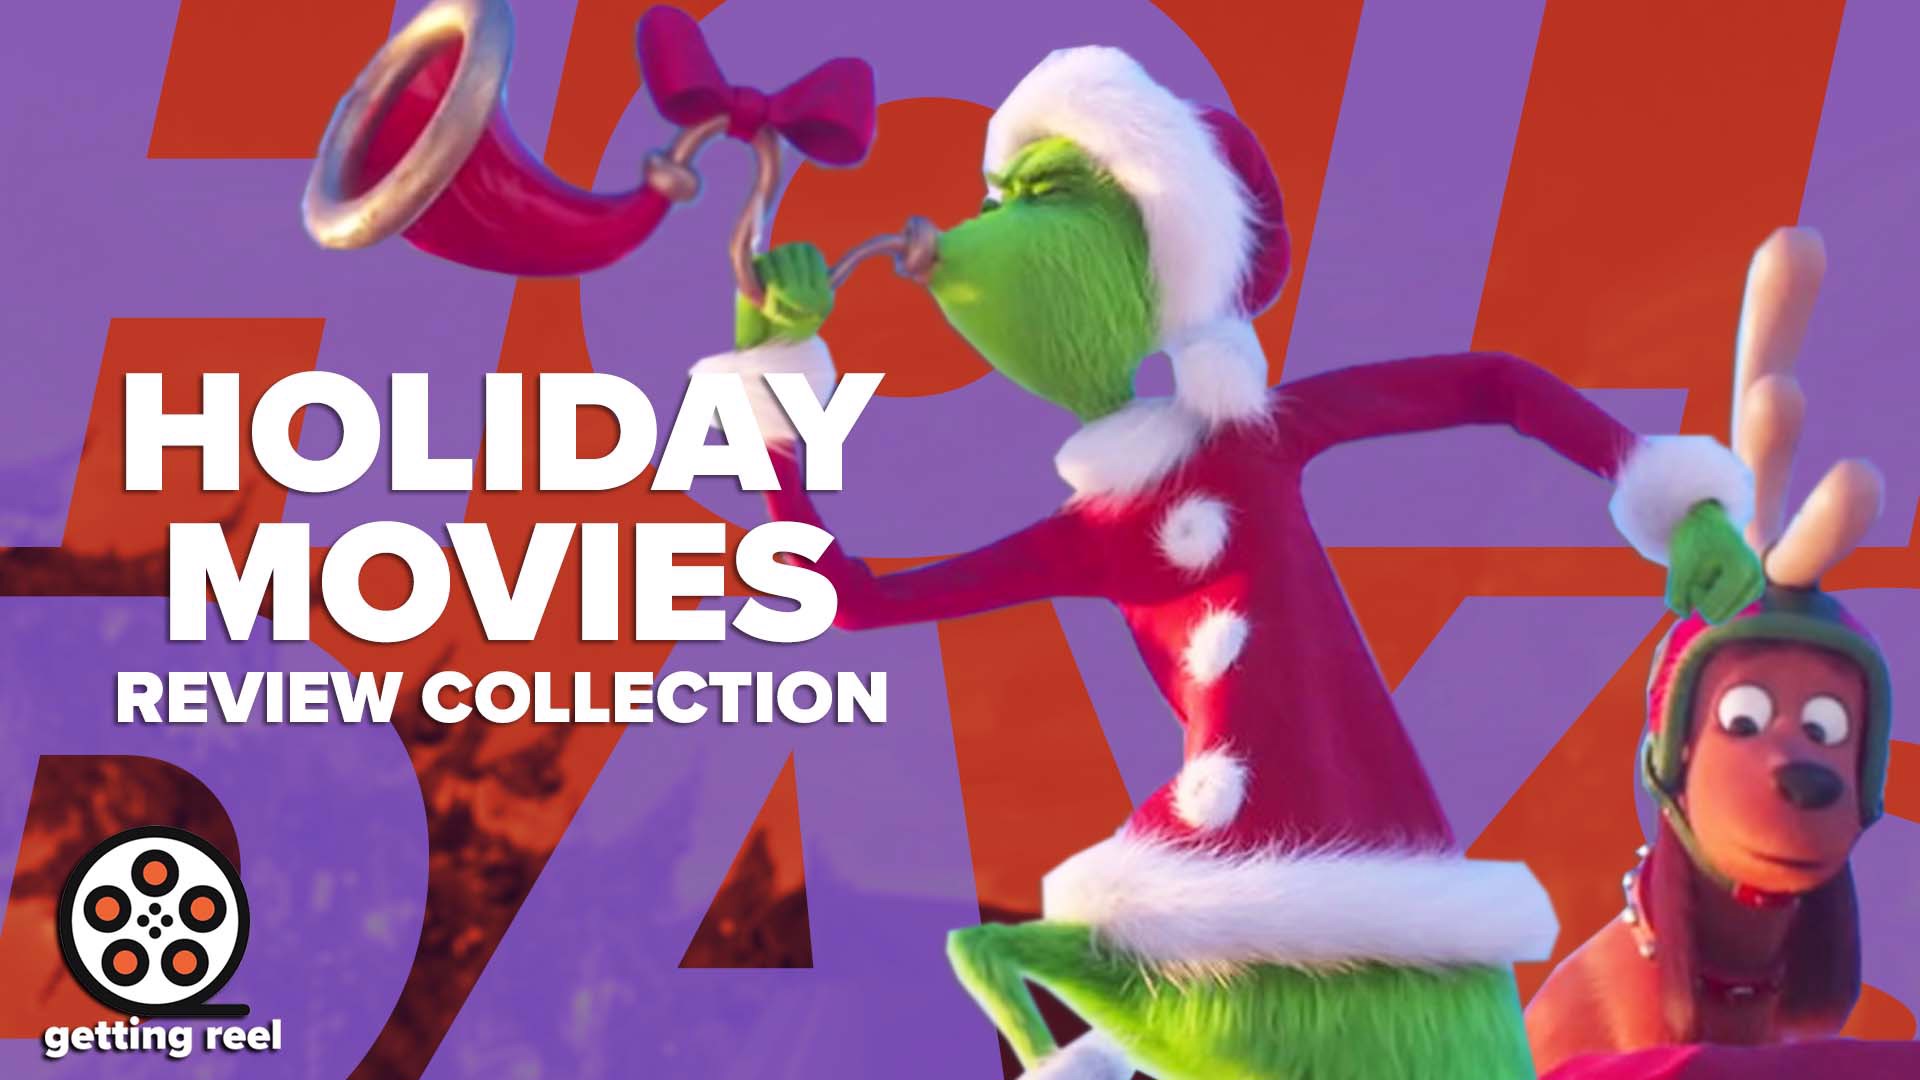 Enjoy this collection of movie reviews about Christmas movies from the newest Grinch to some violent nights and a rom-com.